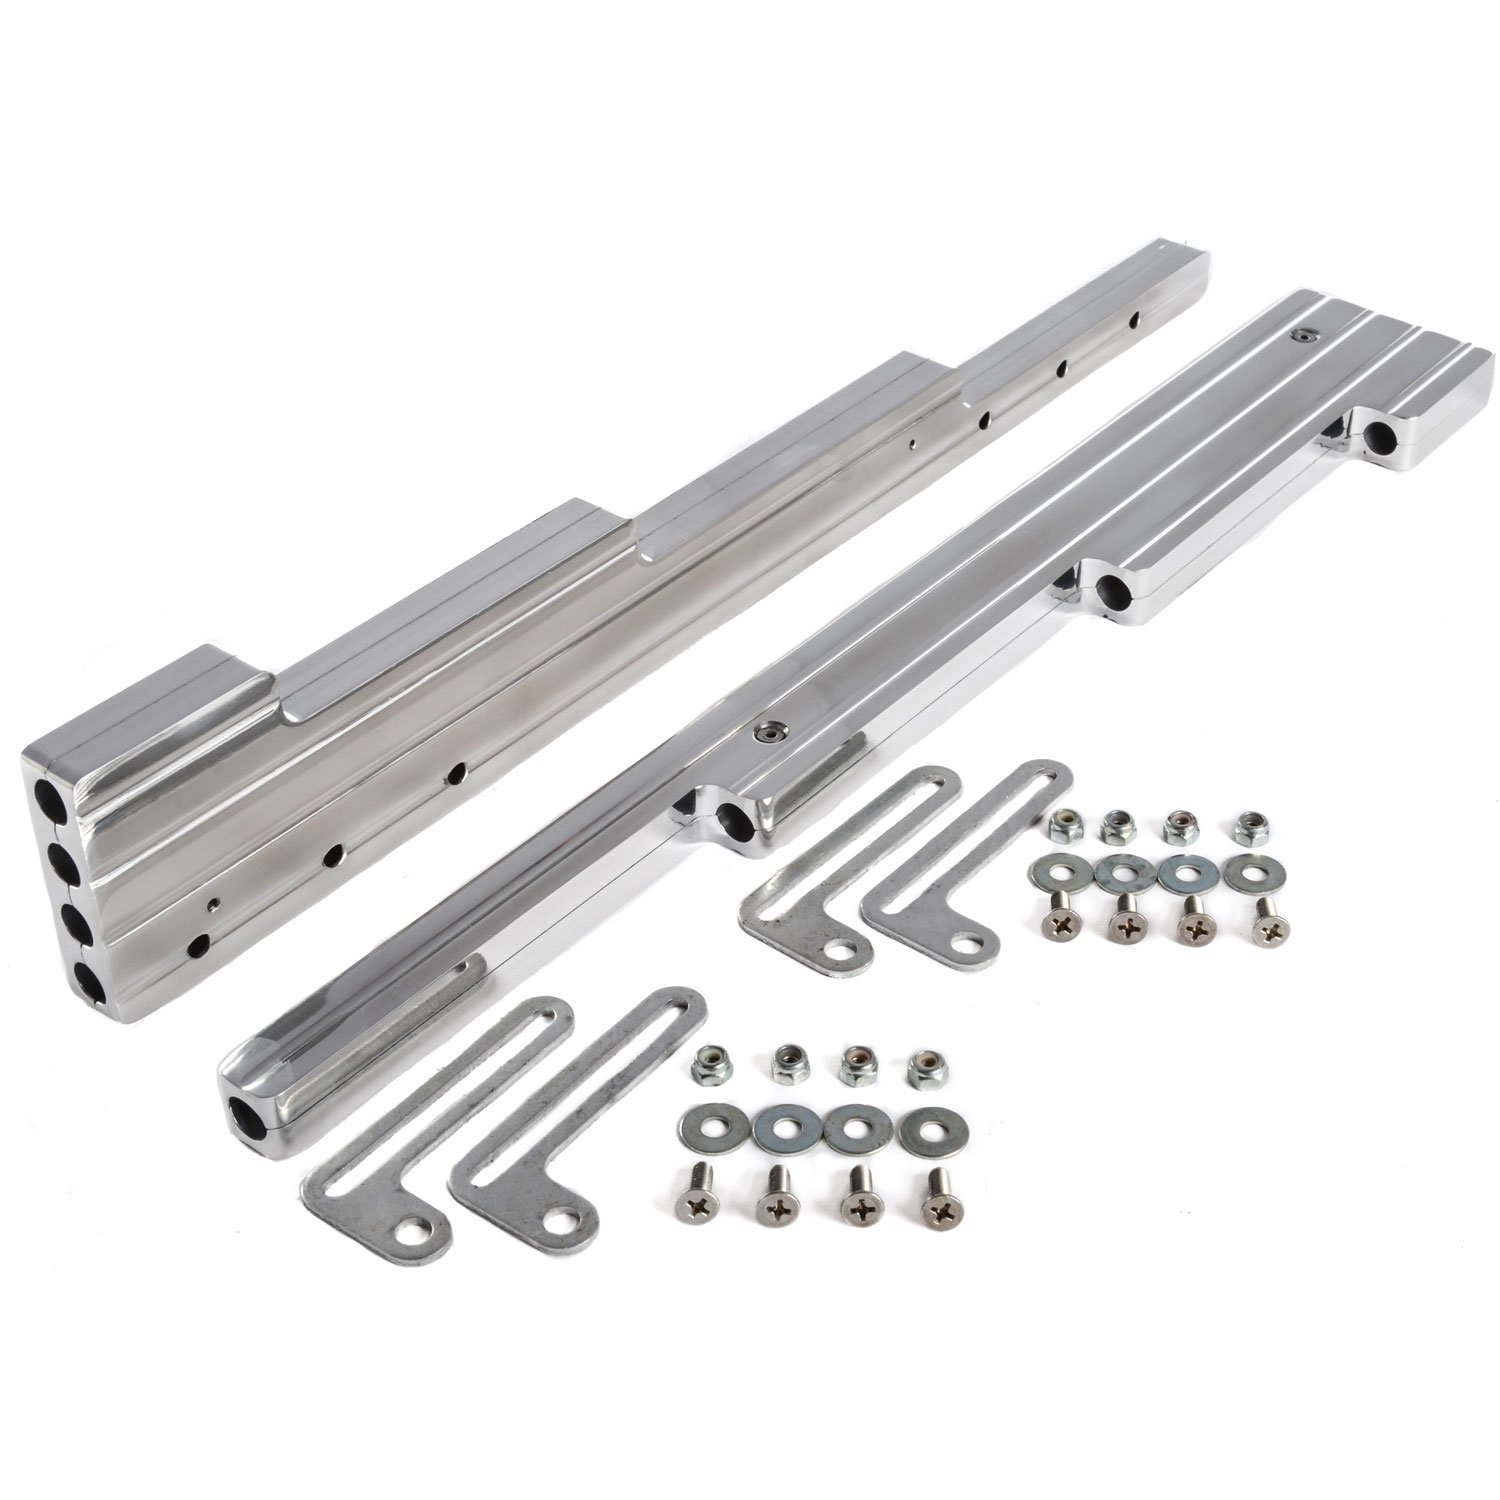 Aluminum Wire Loom Set Fits Up to 9.50 mm Wire [Polished, Ball Milled]